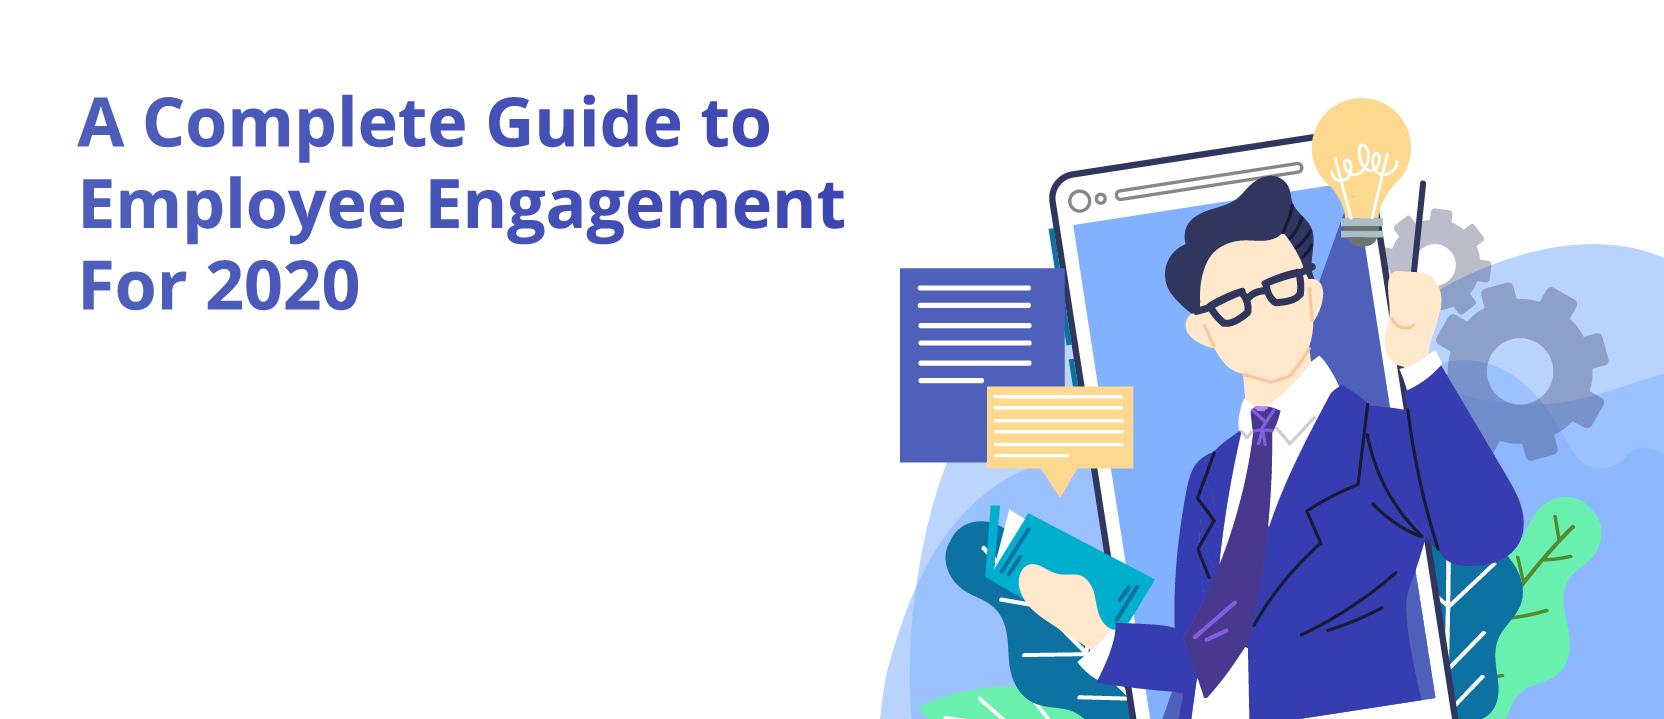 The Ultimate Guide To Employee Engagement In COVID-19